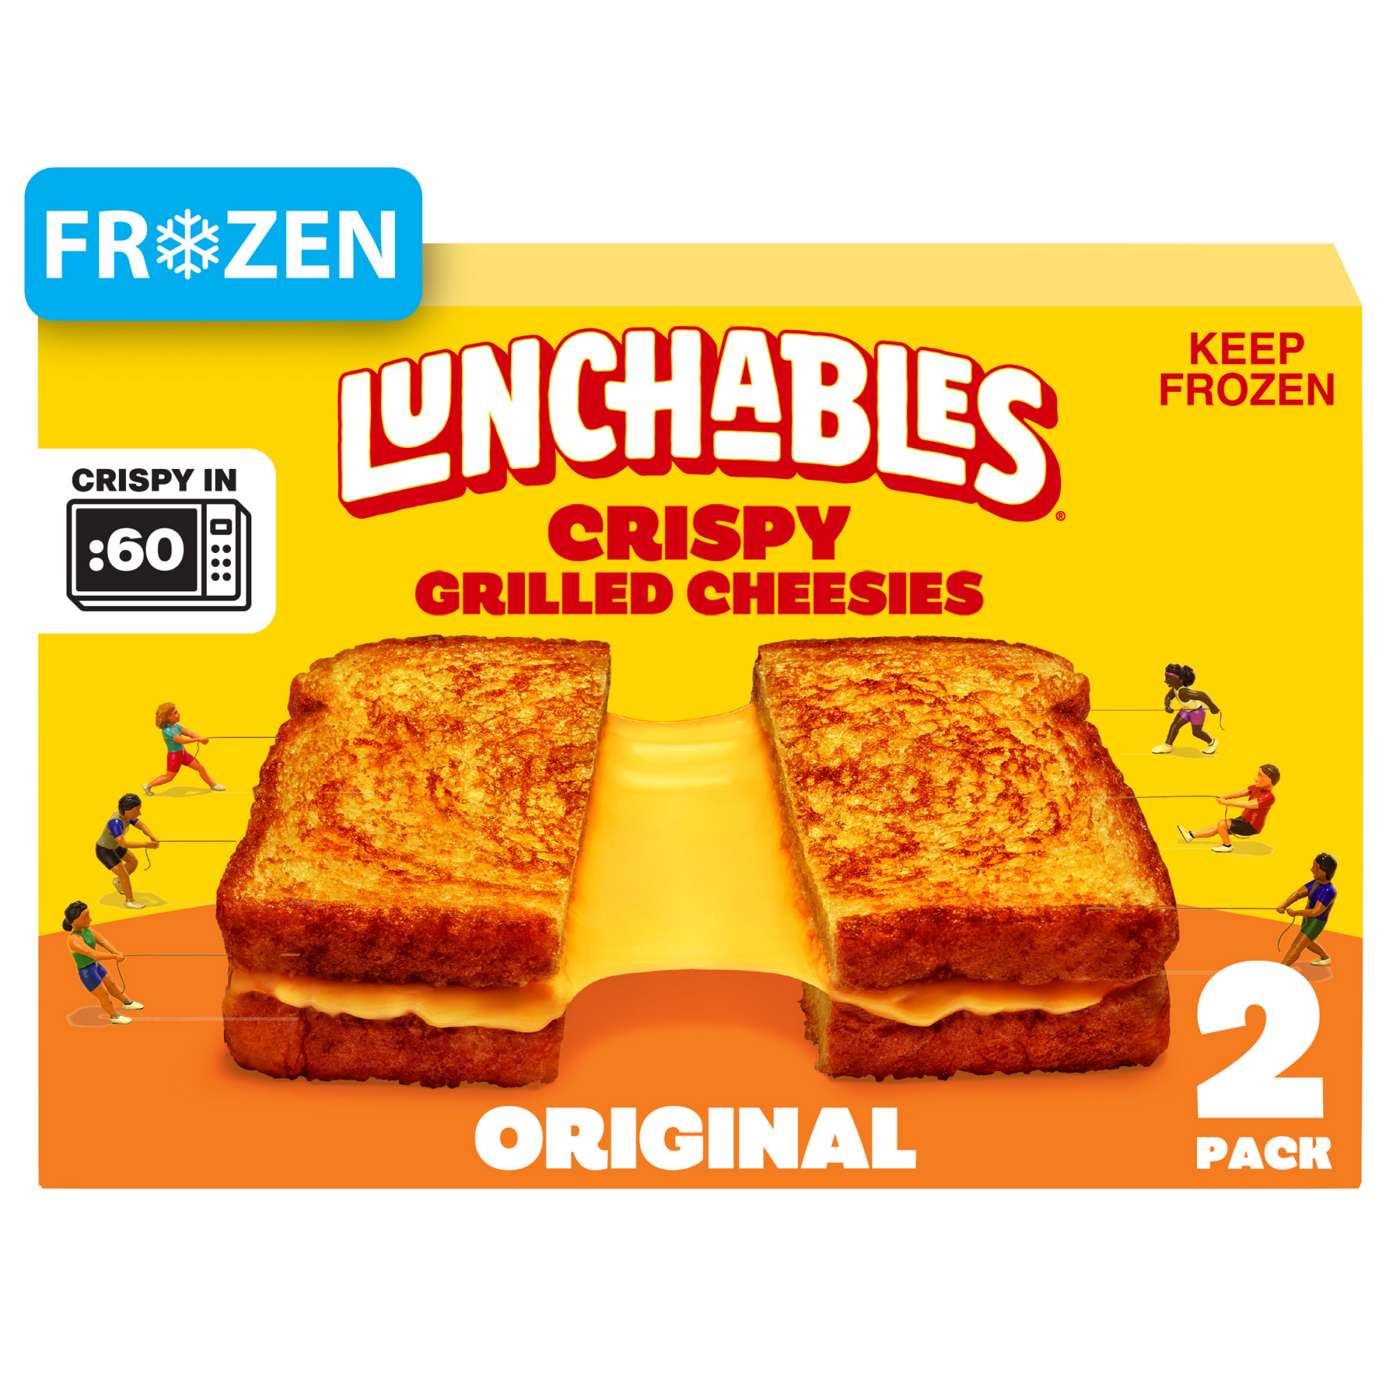 Lunchables Crispy Grilled Cheesies Frozen Sandwiches - Original; image 1 of 9